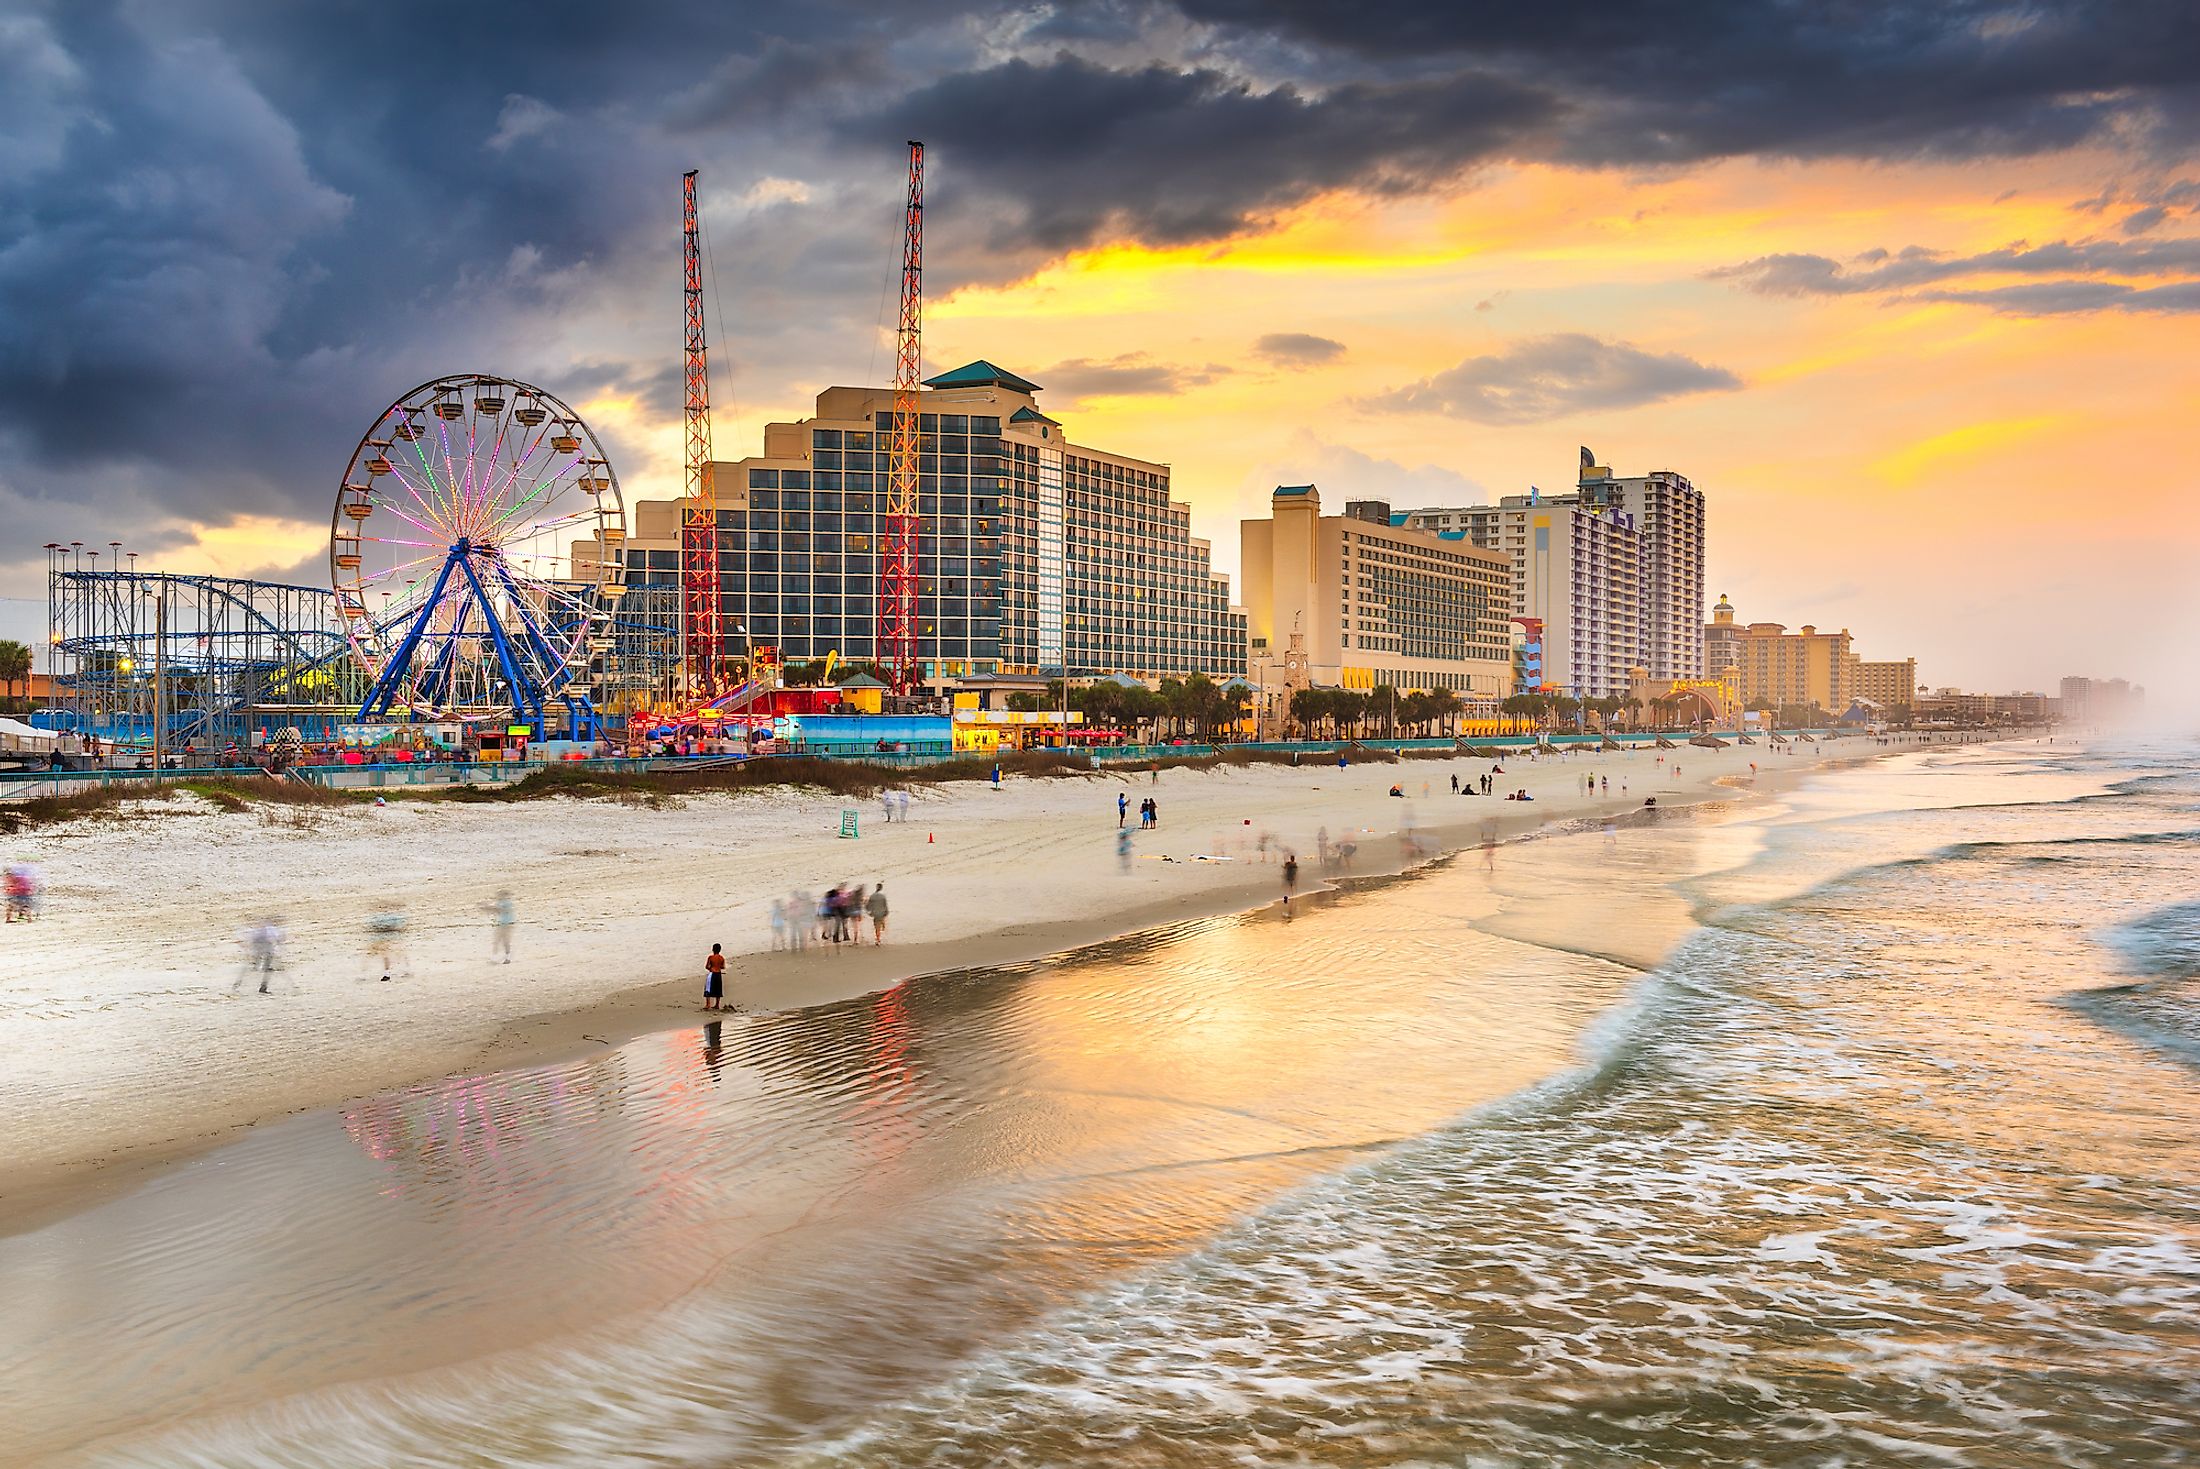 9 of the Best Beaches near Daytona The Family Vacation Guide